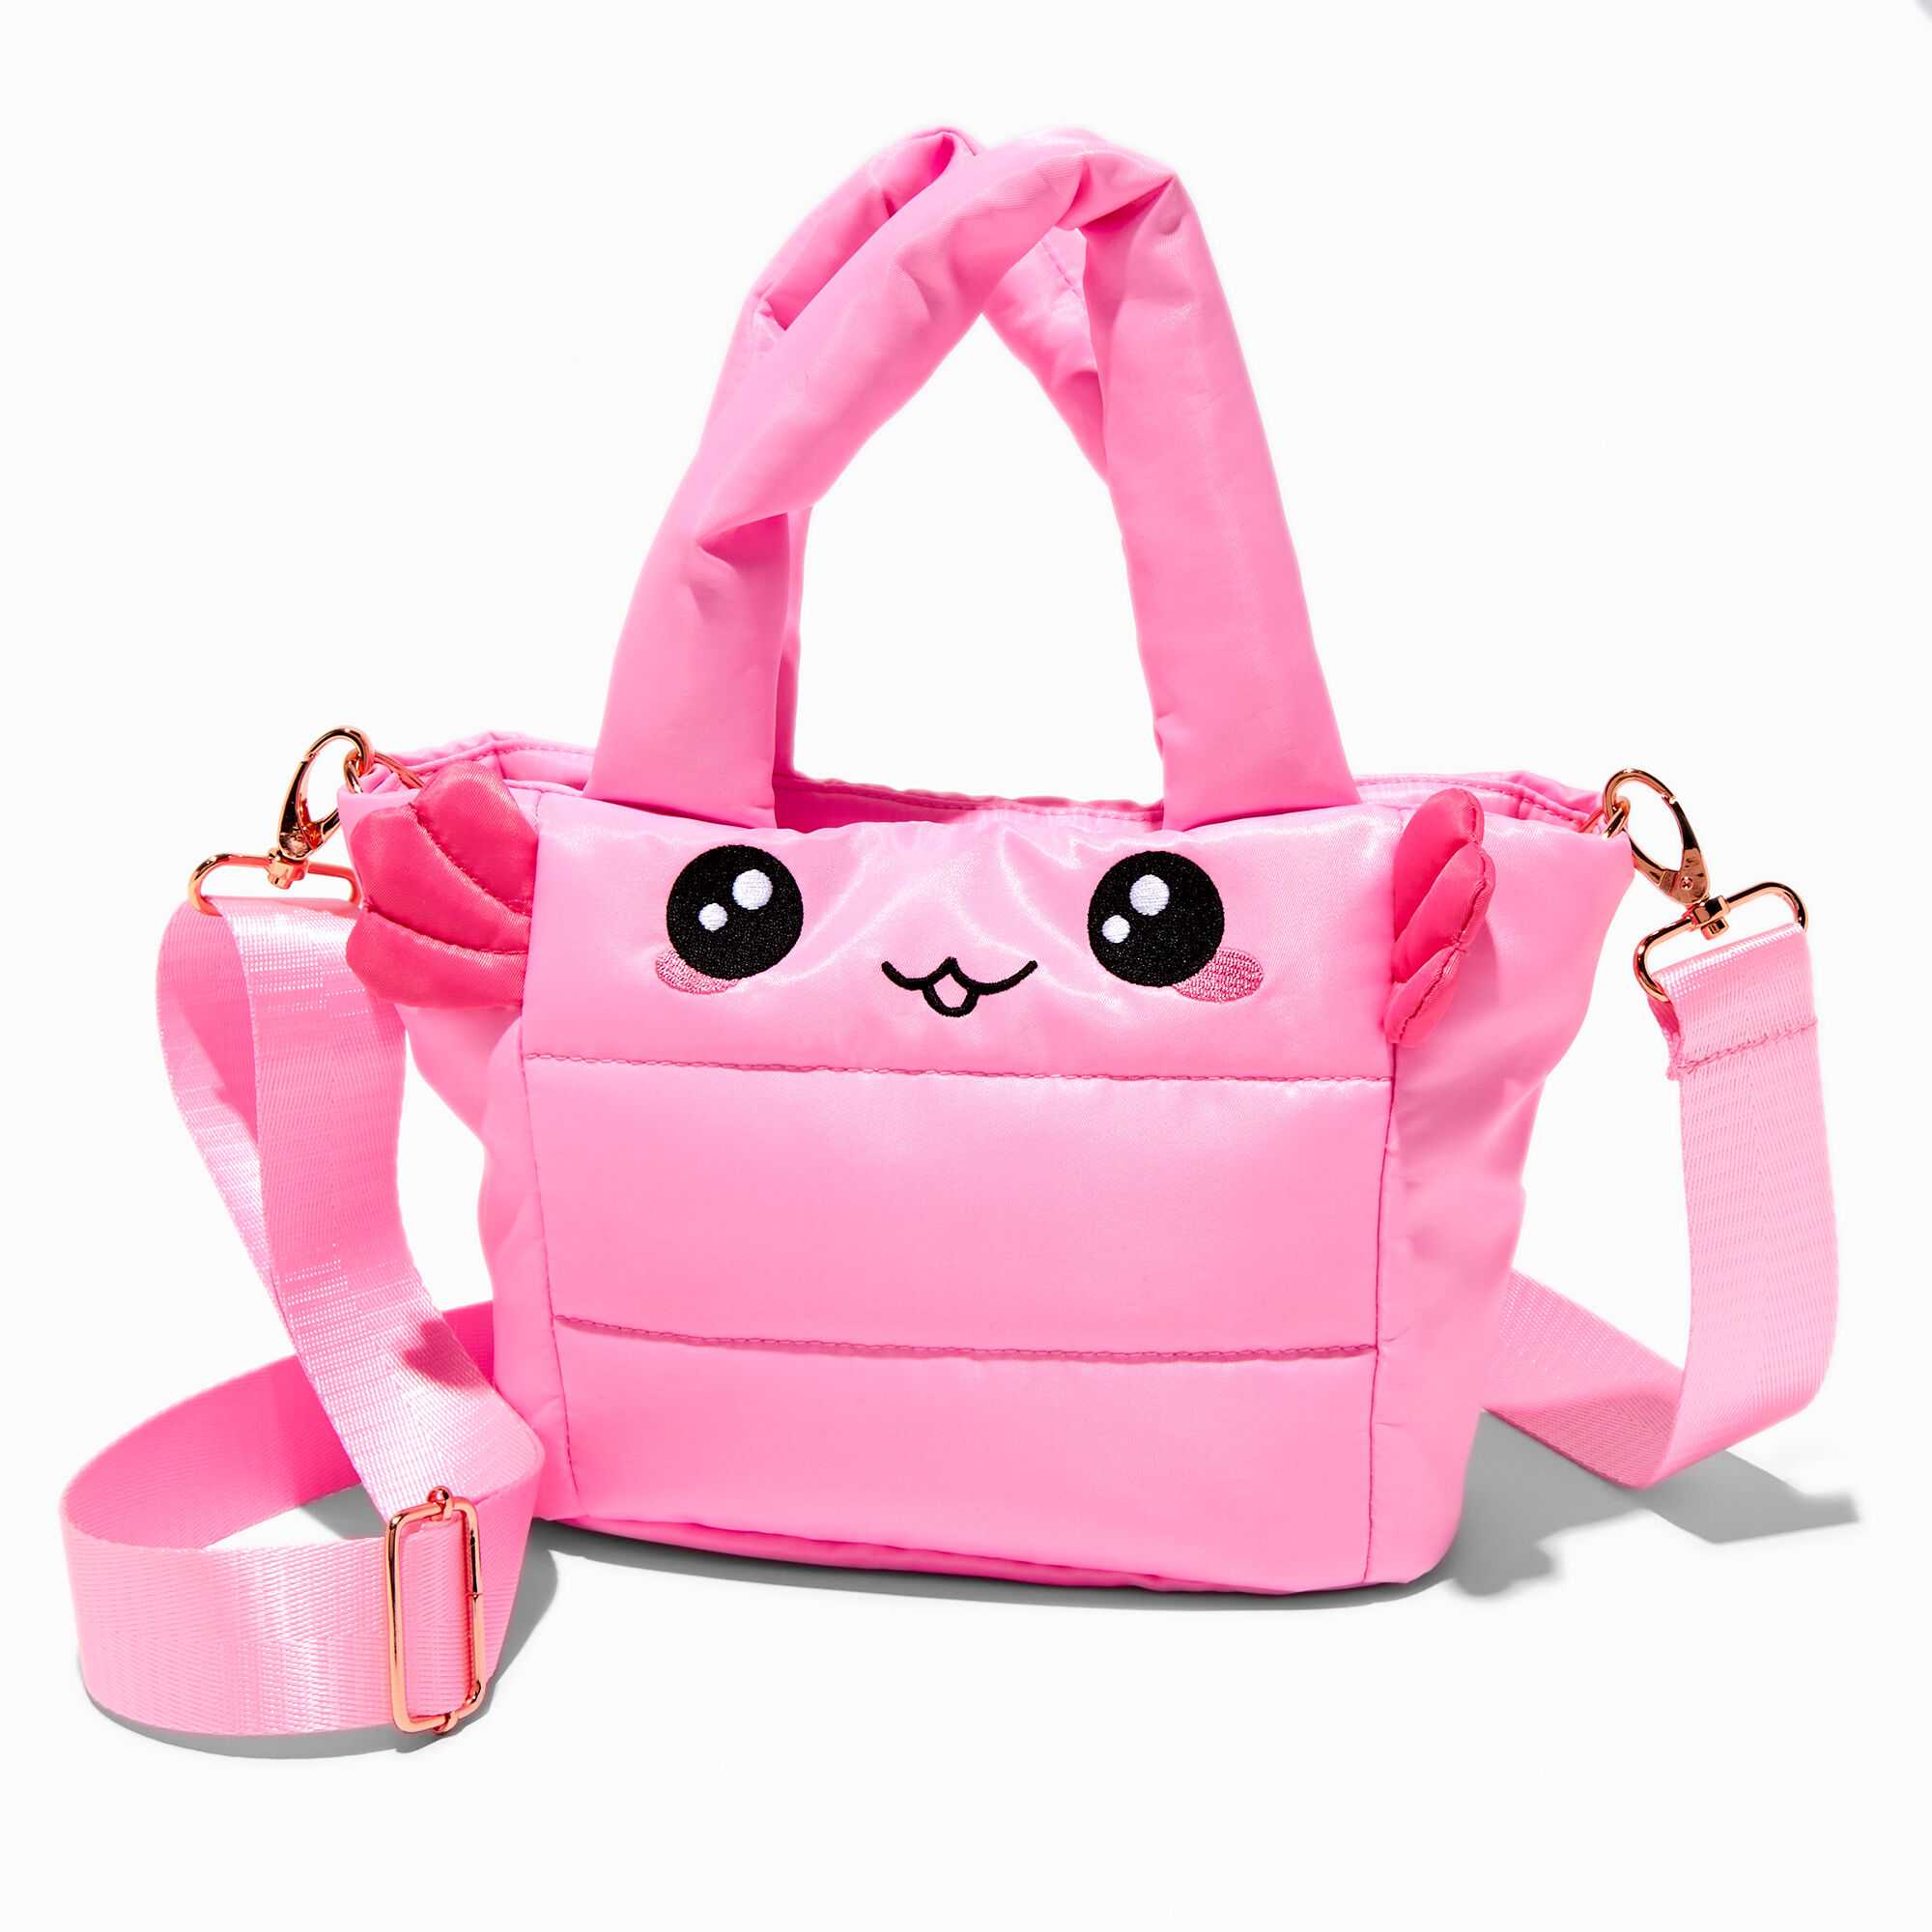 View Claires Axolotl Quilted Crossbody Tote Bag Pink information